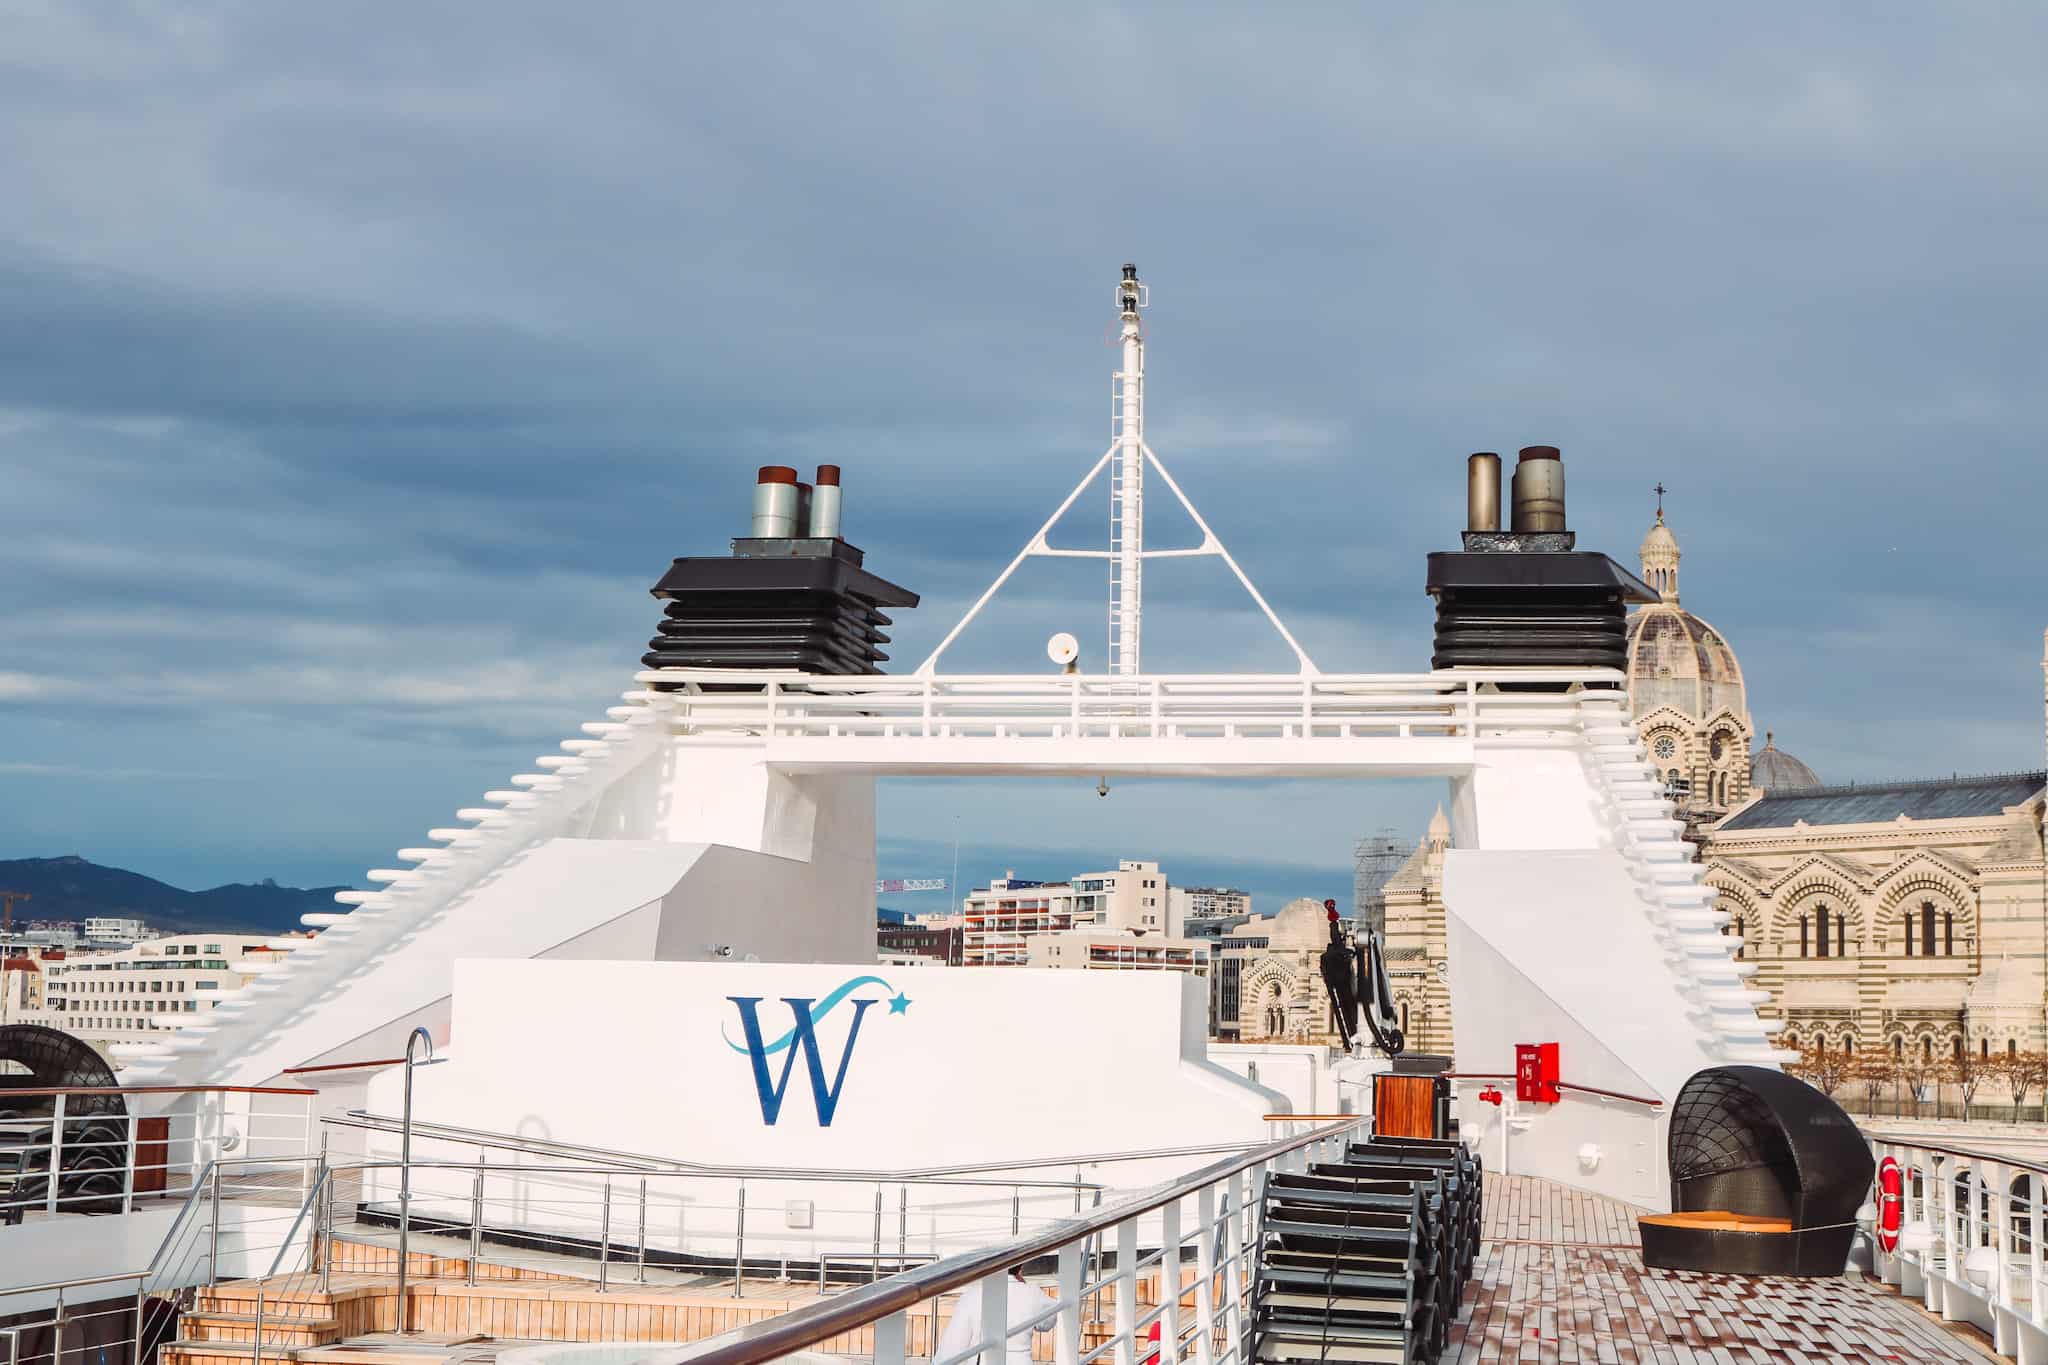 Tips If You Sail On The Windstar Star Legend Cruise